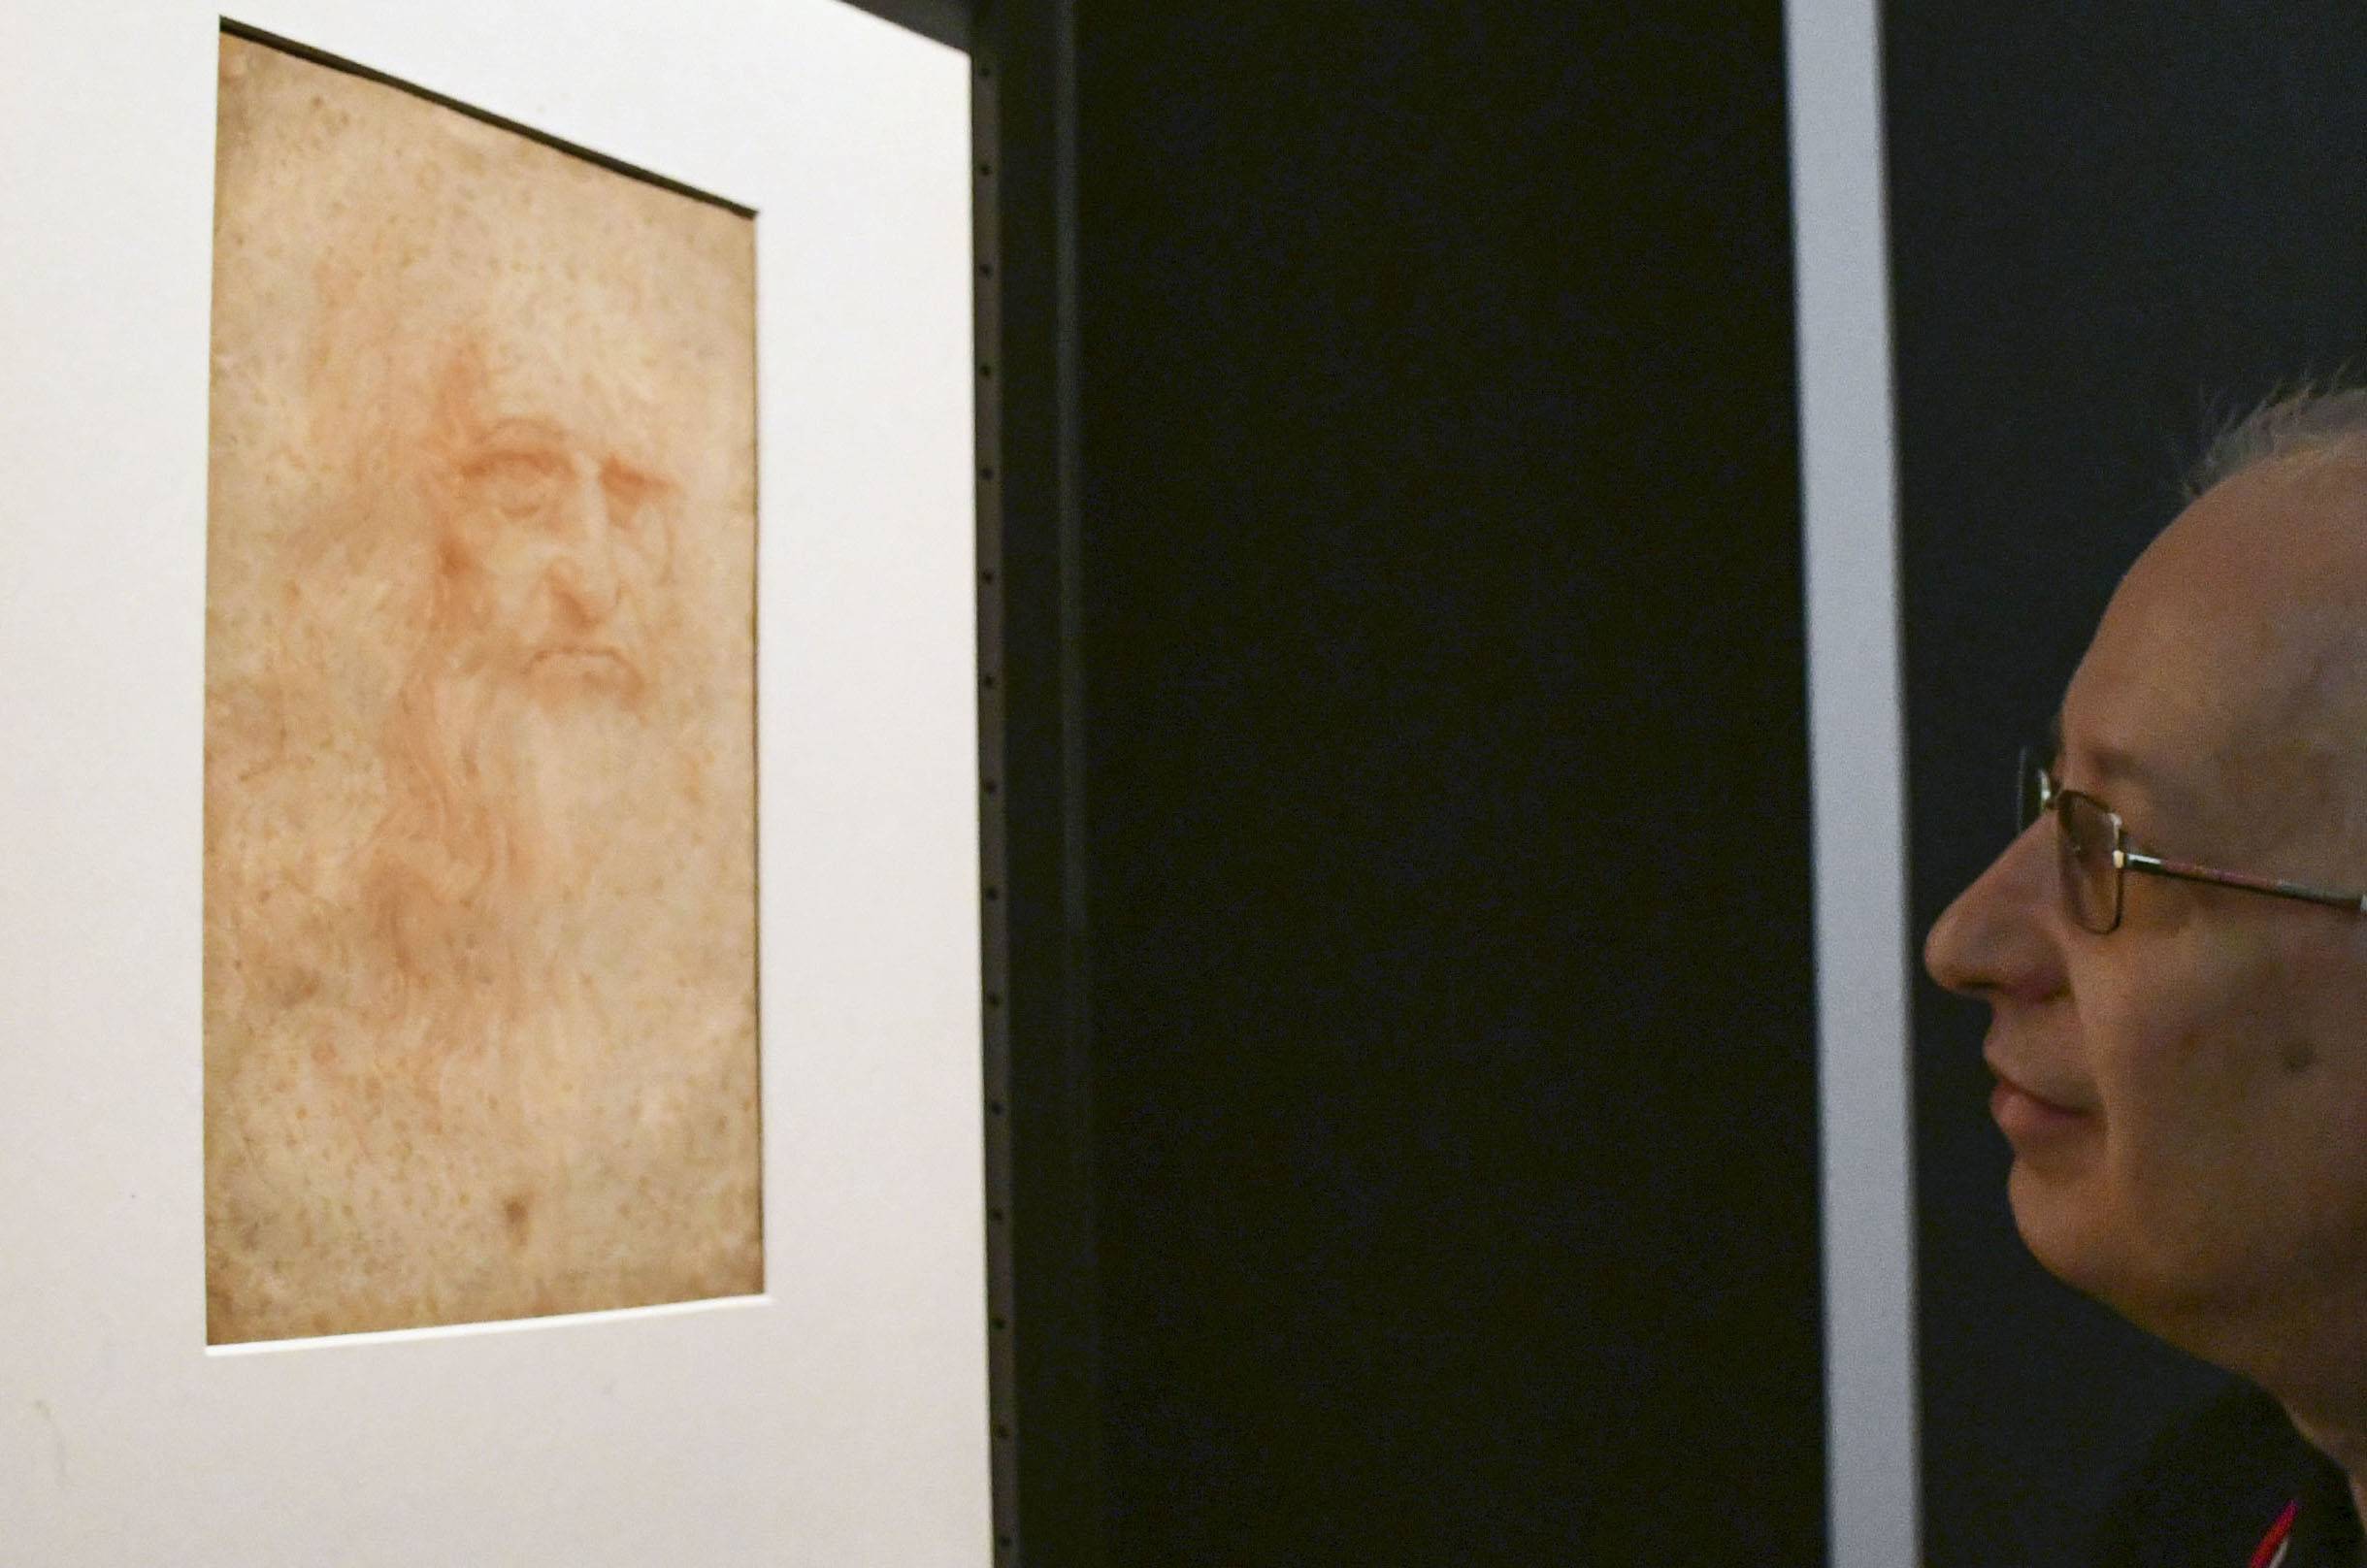 A man looks at a self-portrait of Leonardo da Vinci at a museum in Turin, Italy, on April 30, 2019. The museum is holding an exhibition through July of da Vinci's drawings and notebooks to mark the 500th anniversary of his death. (Kyodo via AP Images) ==Kyodo